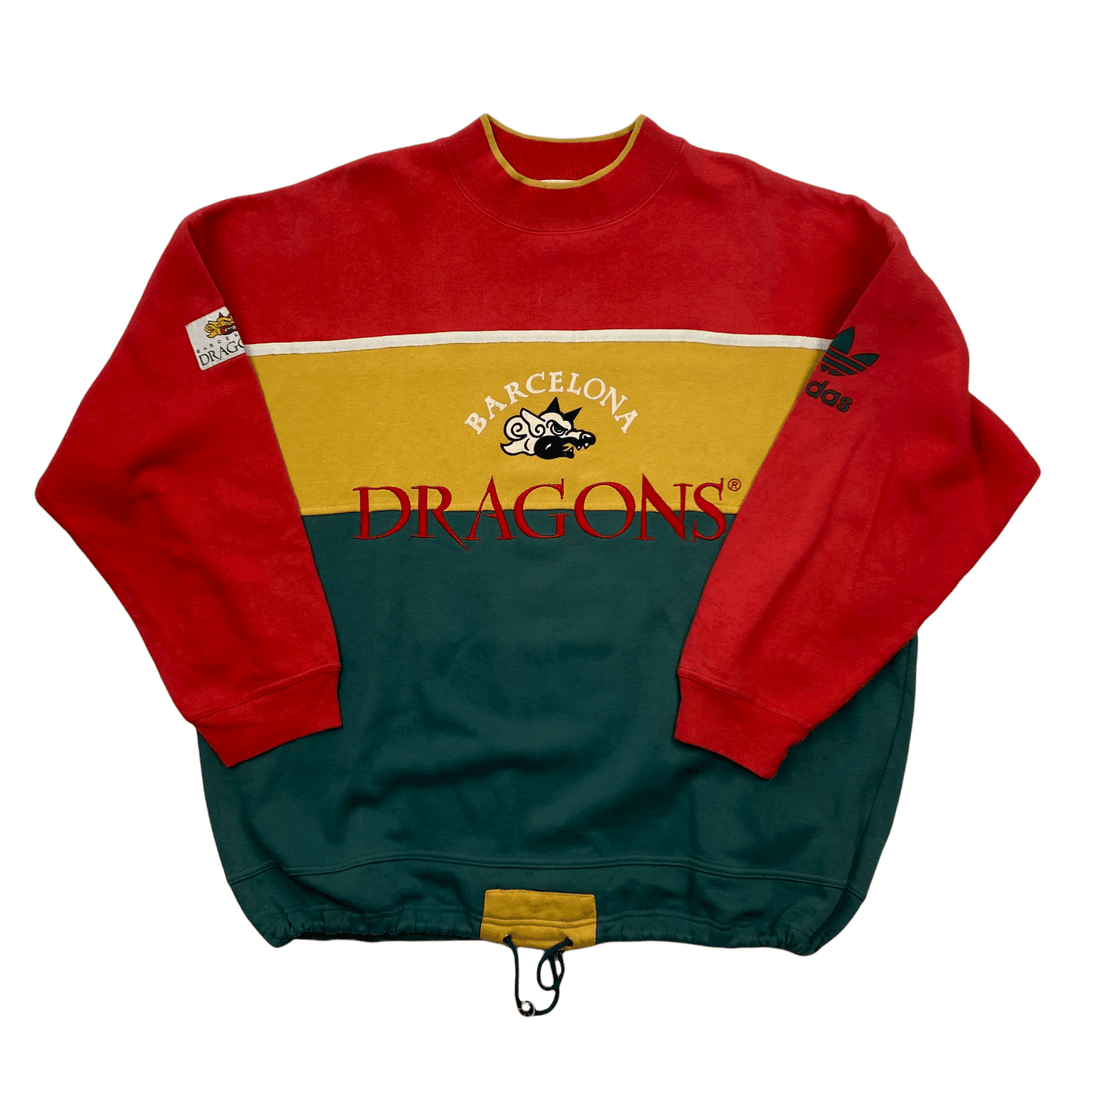 Vintage 90s Green, Red + Yellow Adidas Spell-Out Barcelona Dragons Sweatshirt - Extra Large - The Streetwear Studio